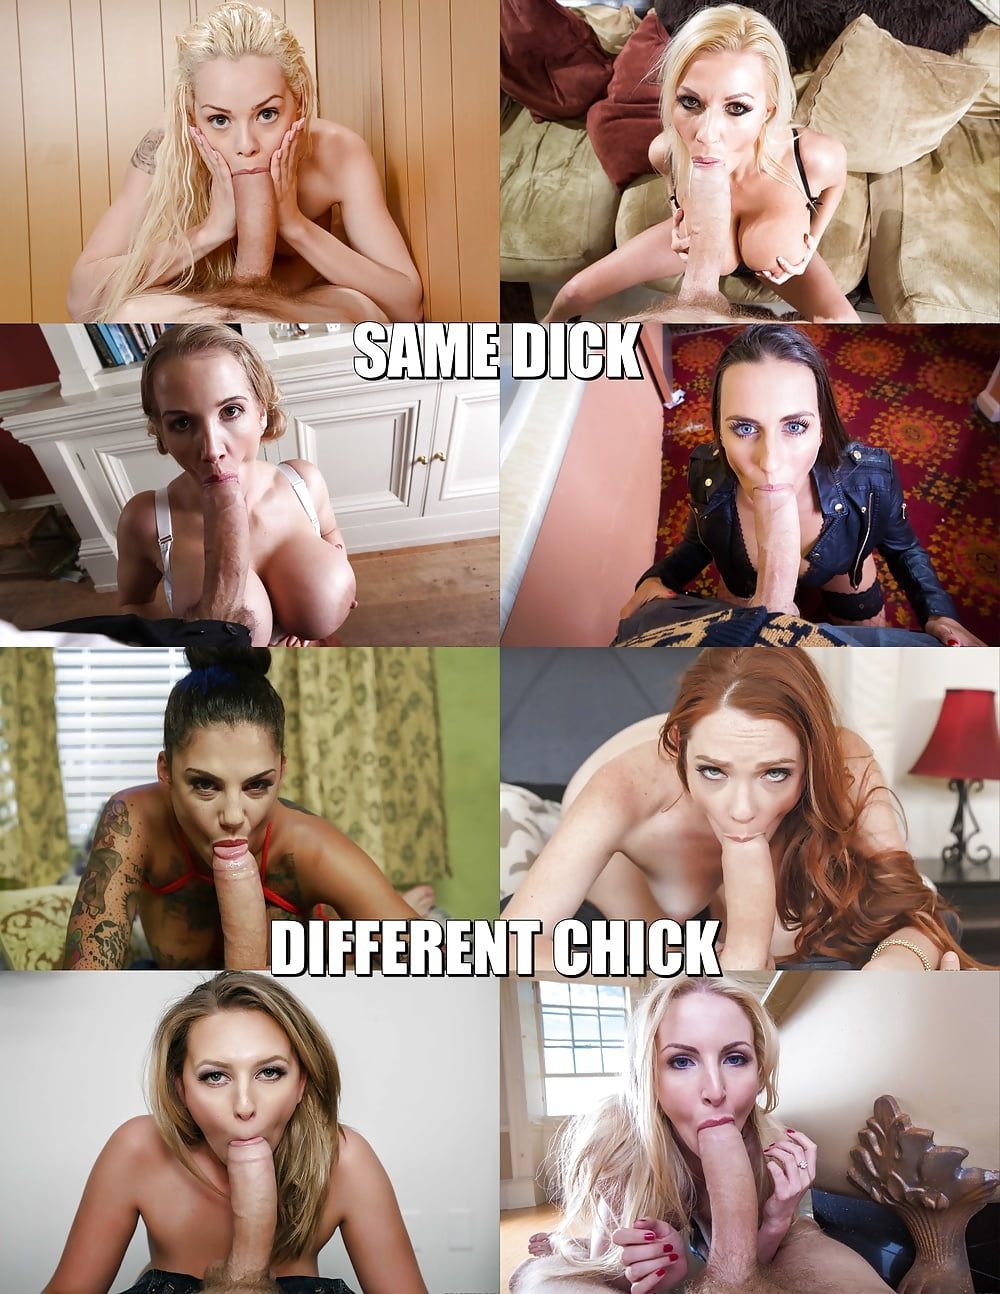 Same dick different chick